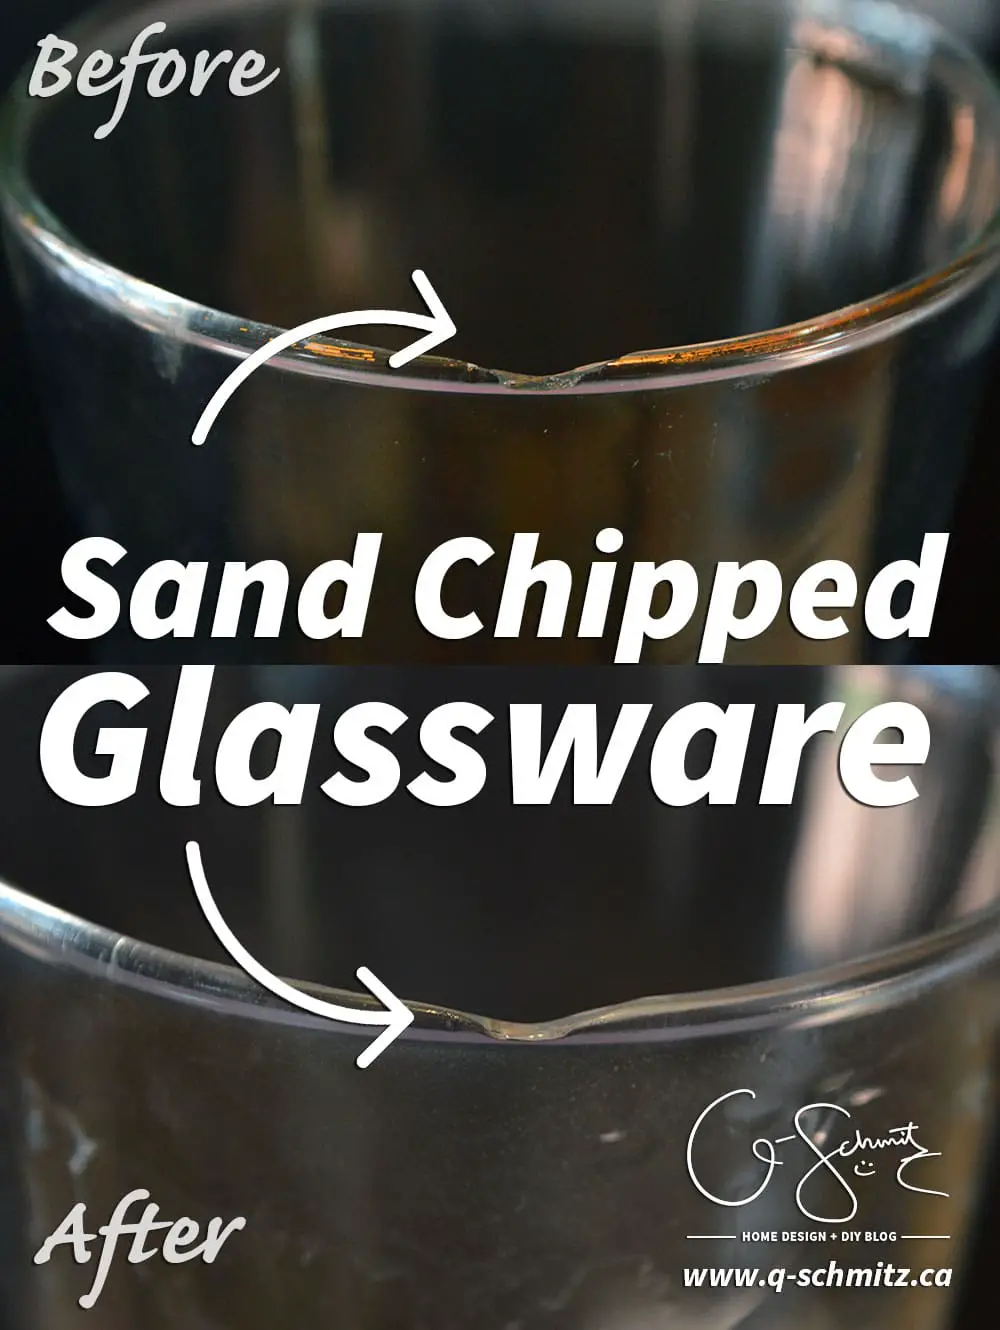 Do you have any sharp, chipped glasses or dishes that you don’t want to throw out? Did you know that you can sand chipped glassware so that your items are still usable, but won’t be sharp and dangerous!? This is a quick and easy DIY fix – let me show you how it’s done.